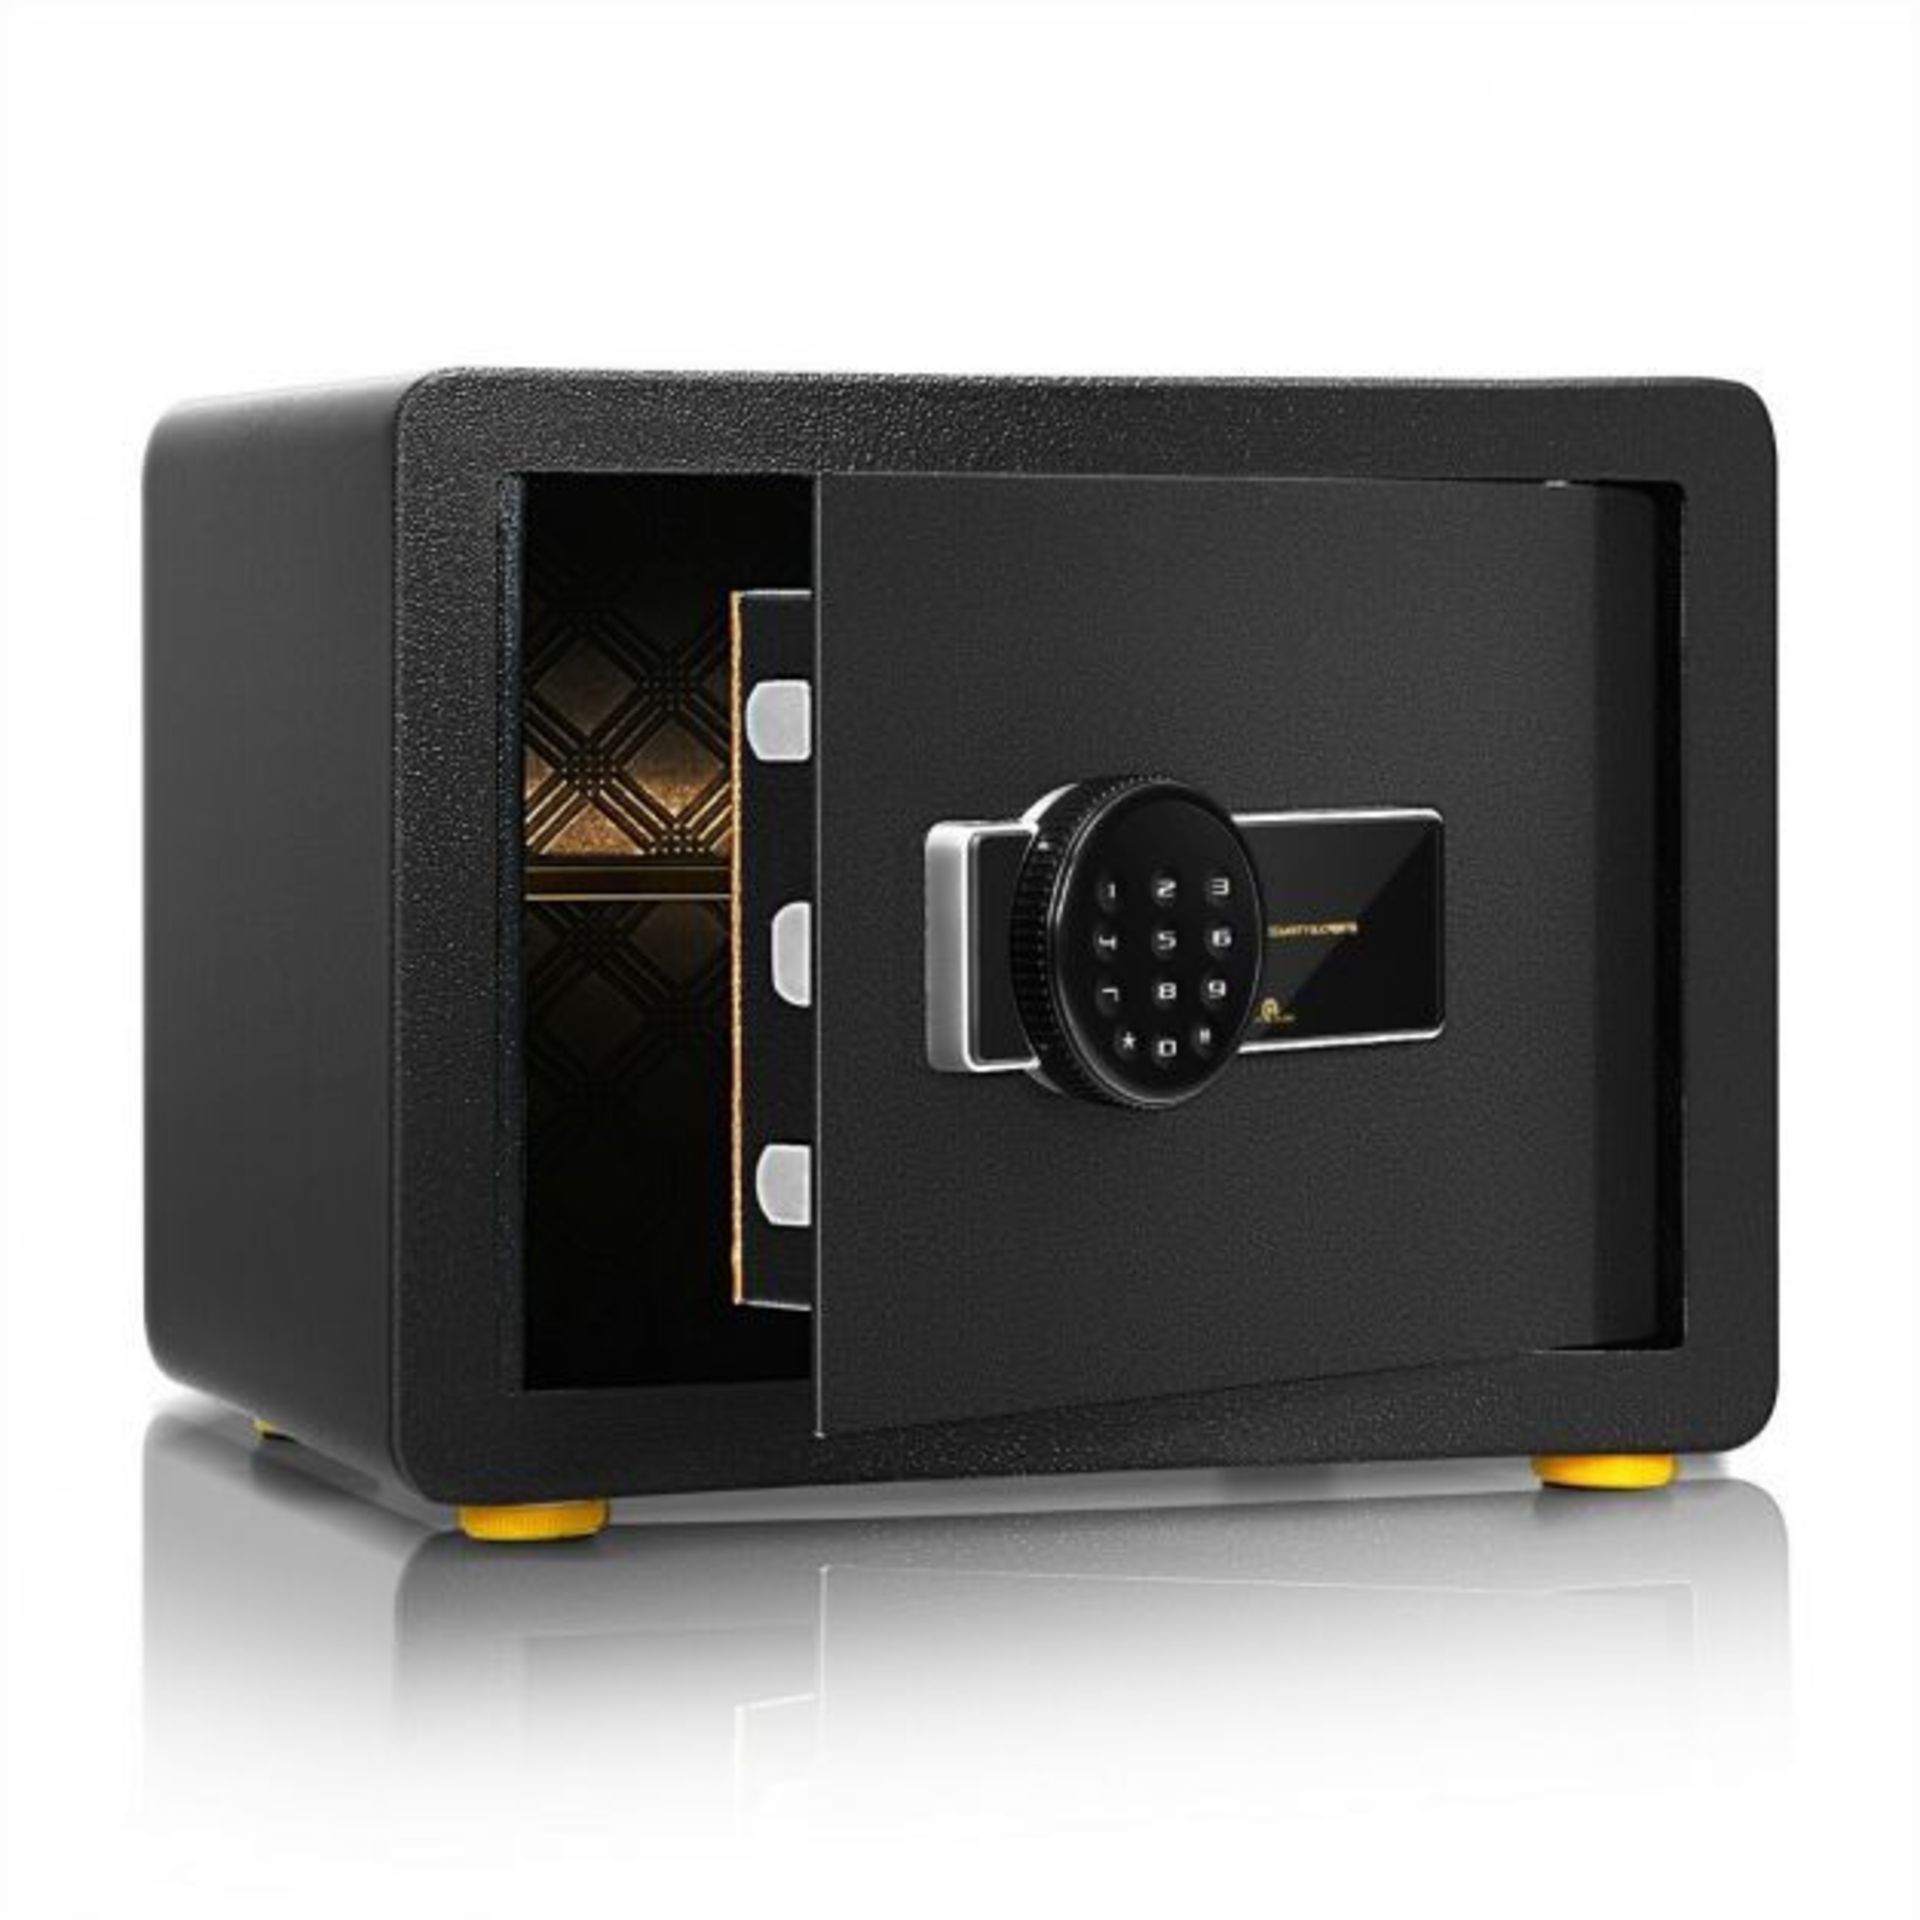 Digital Security Safe Box with Keys for Jewelry Money Cash. - ER53. The electronic safe case is